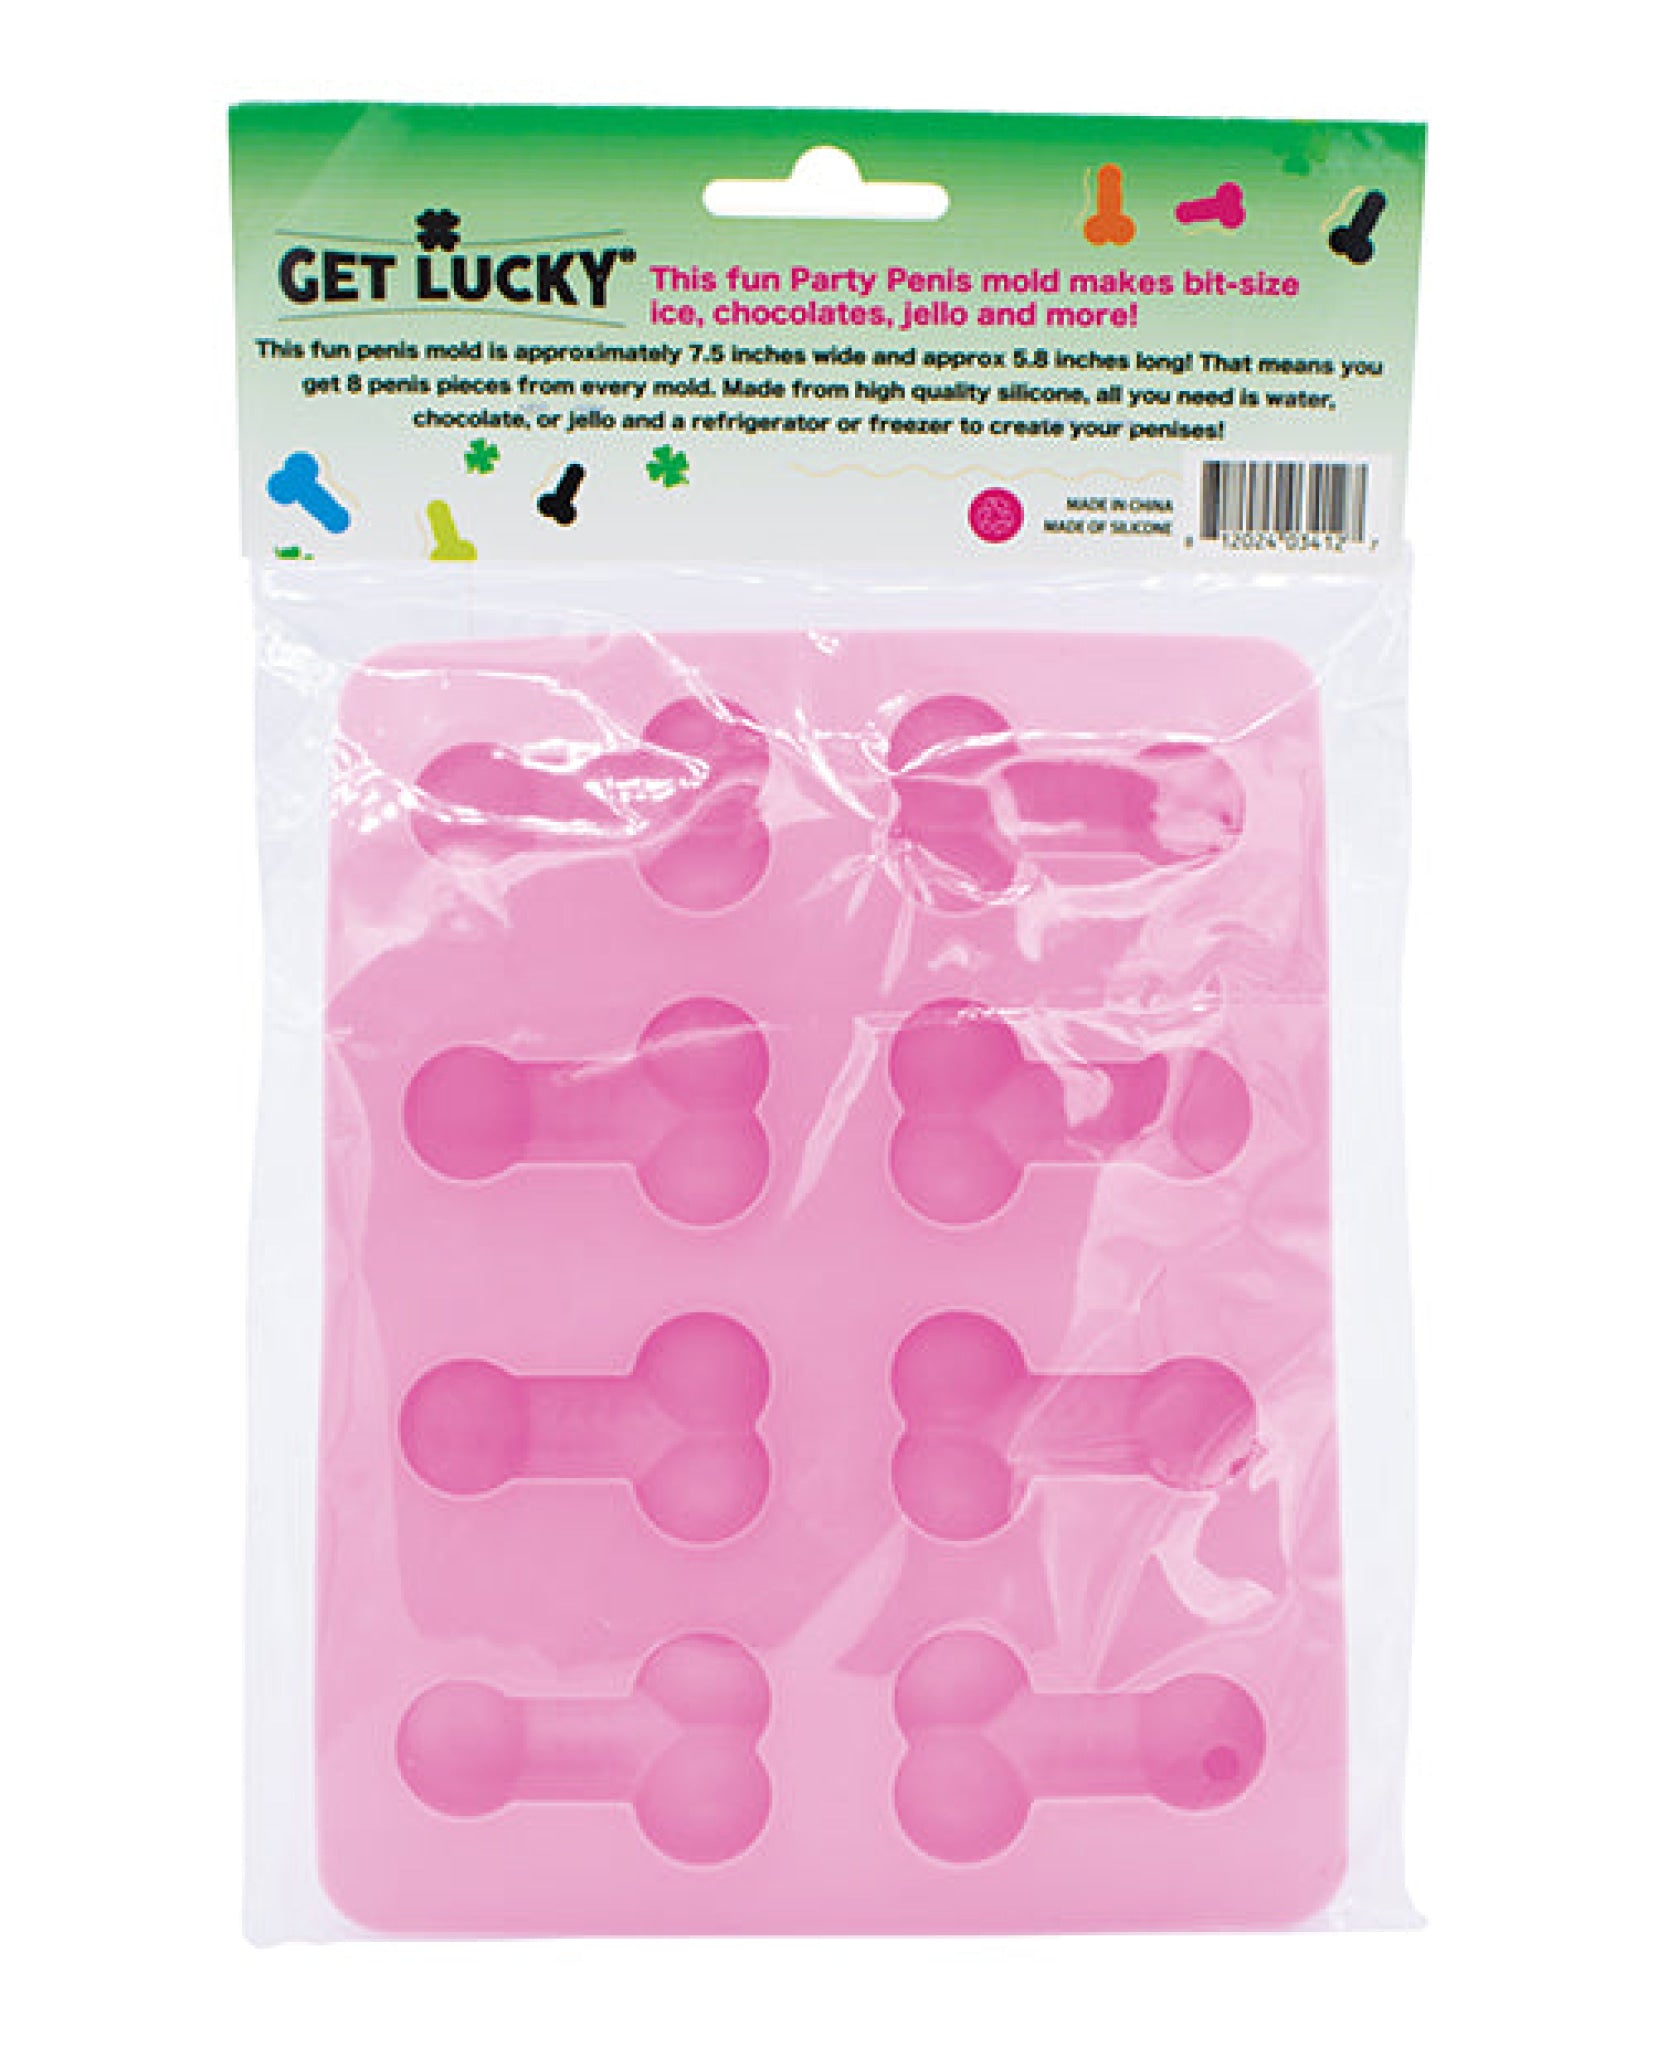 Get Lucky Penis Party Chocolate - Ice Tray - Pink Get Lucky